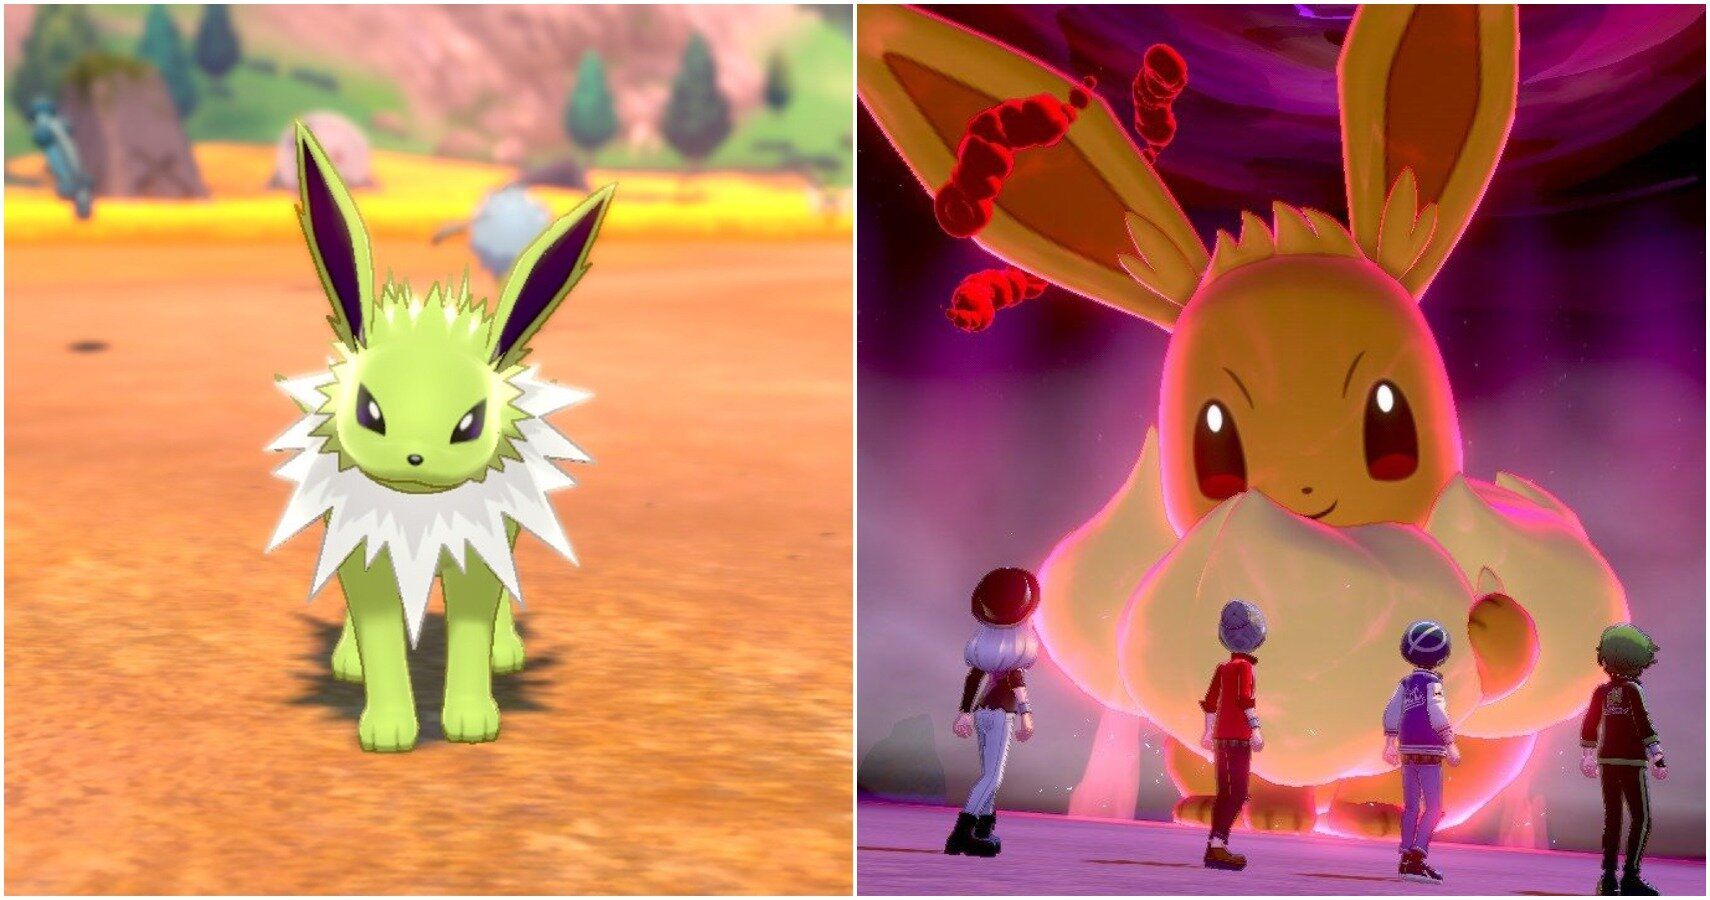 Live] All Shiny Eeveelutions in Pokemon Sword and Shield after a total of  26,762 SRs![Full Odds] 